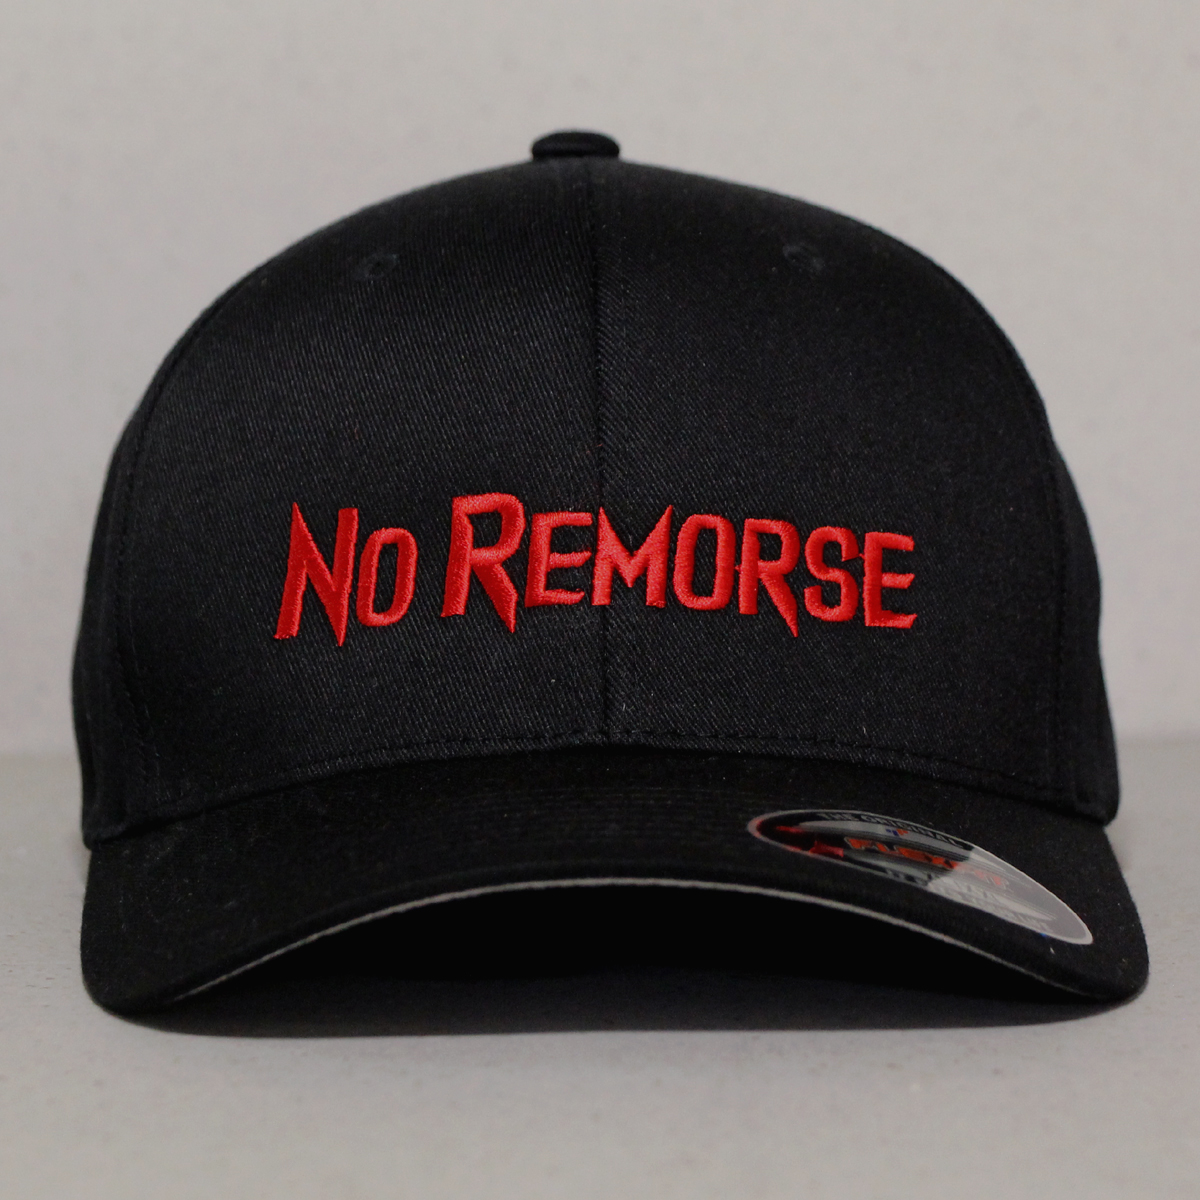 No Remorse Baseball Hat - Black with Red Letters